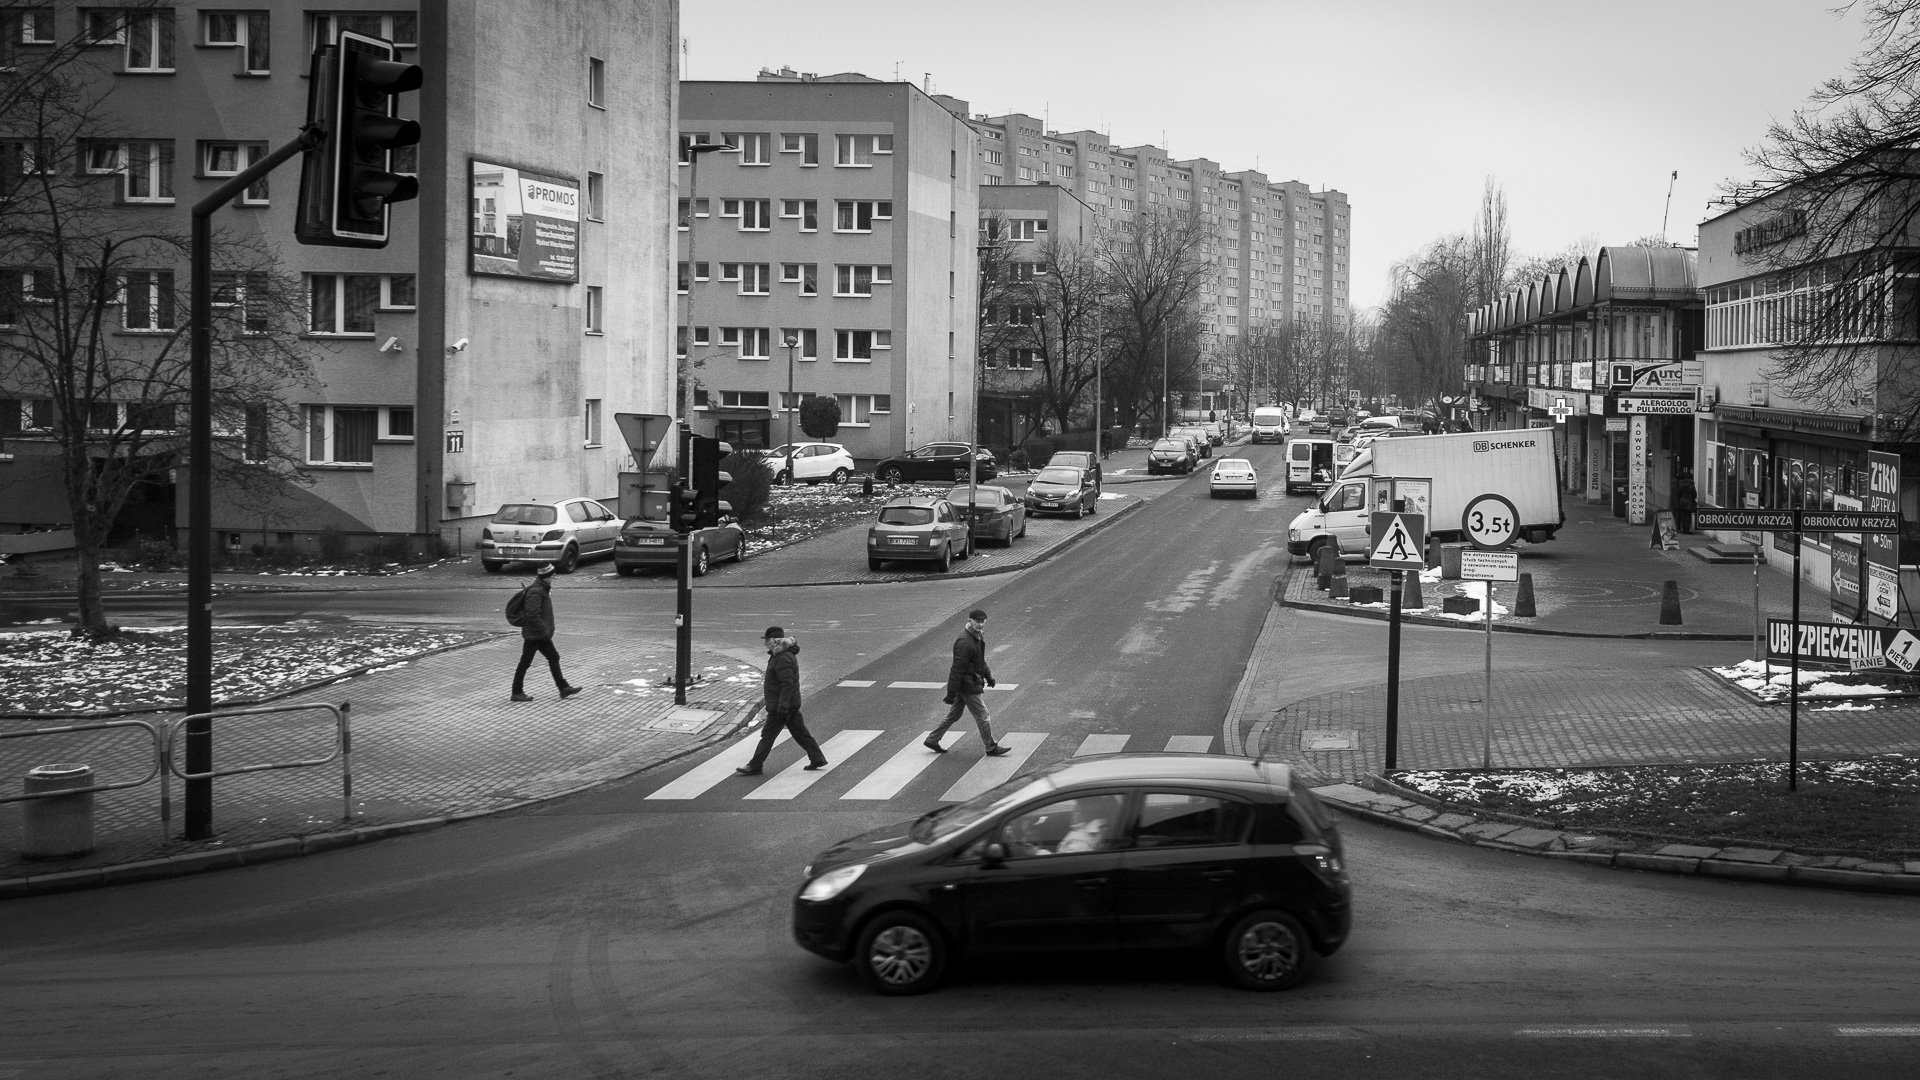 The streets of Nowa Huta, a city planned in the communist era. 